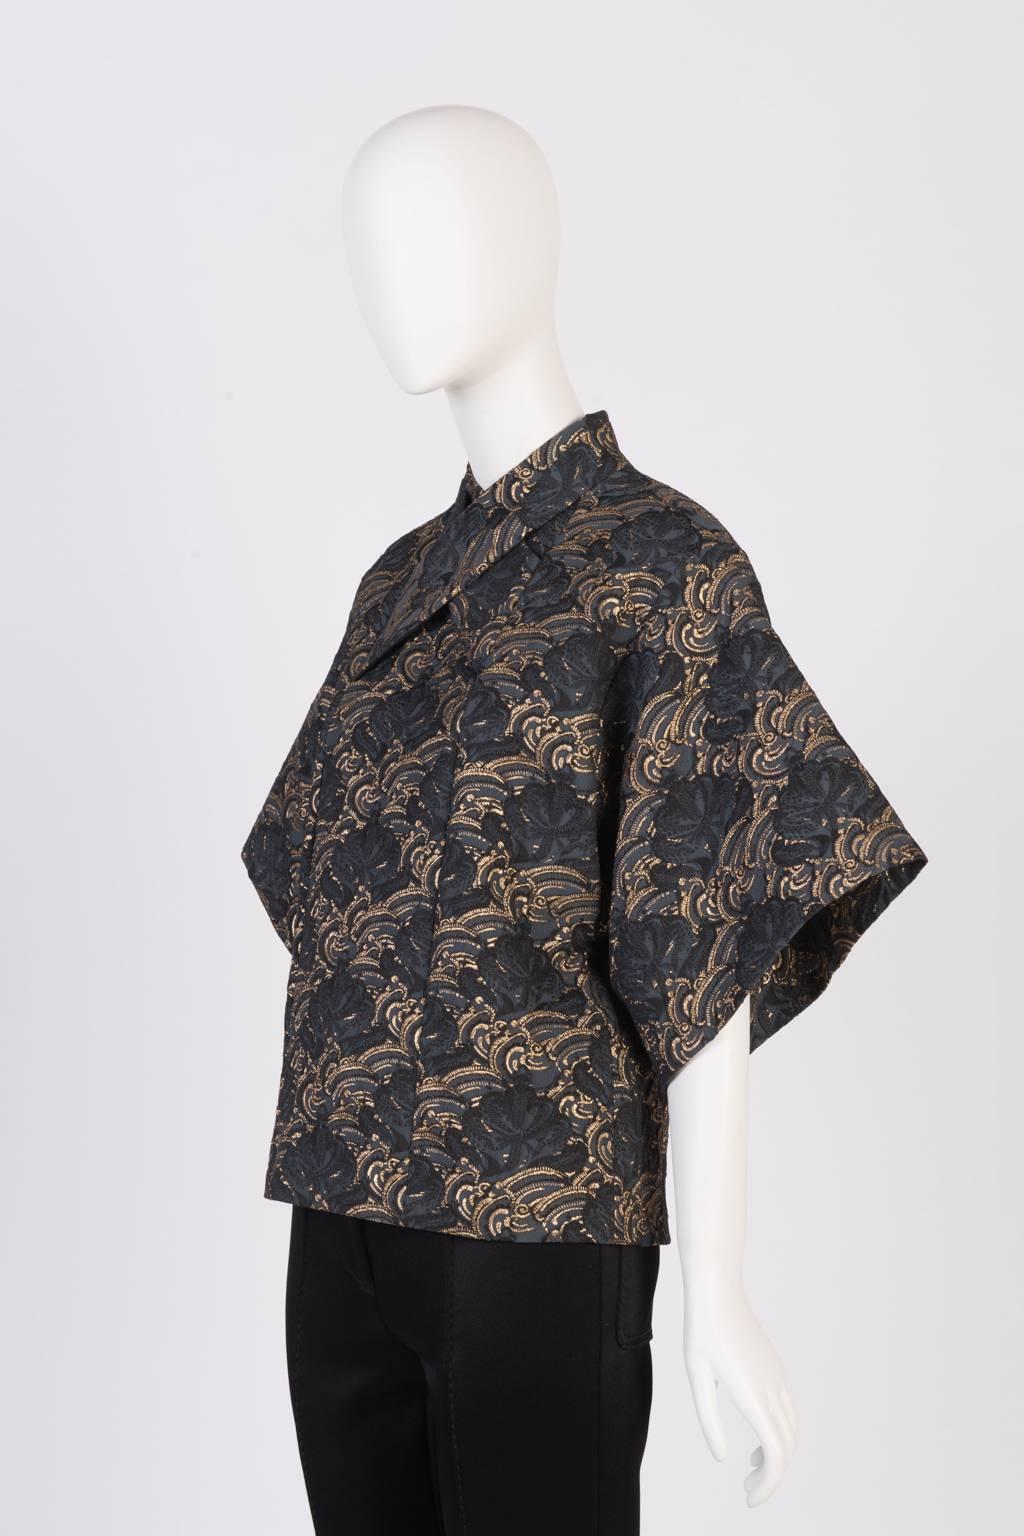 Fitted wrap top in lightweight, gilt-edged floral pattern features elbow length kimono sleeves, Mandarin collar, and back zipper.